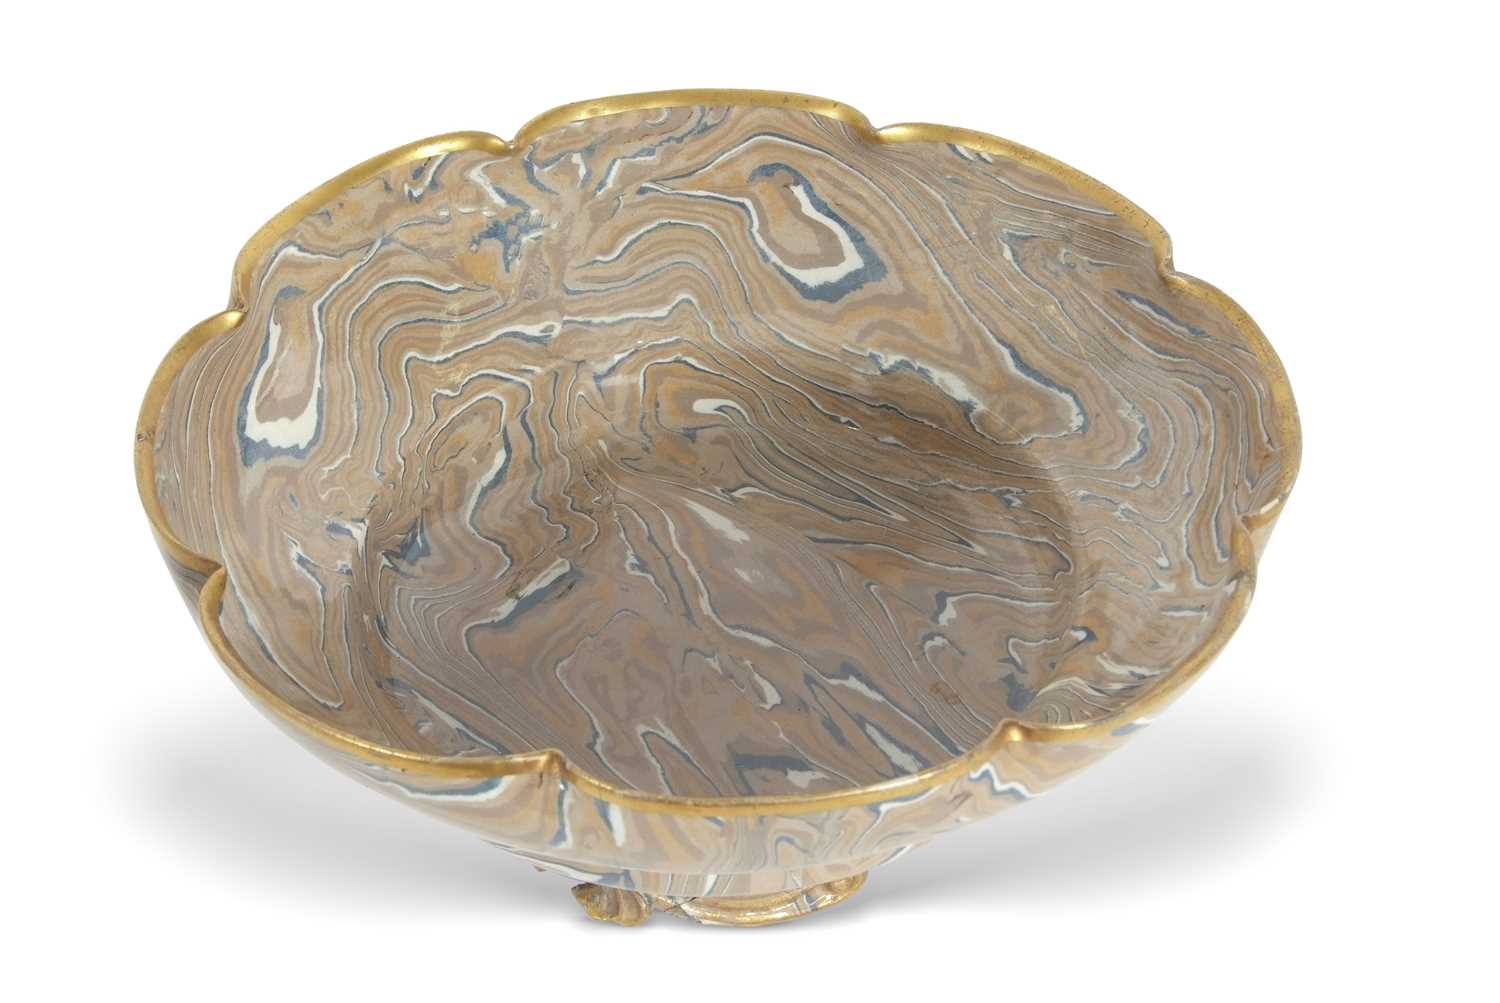 A large shaped Agate ware bowl by Doulton Lambeth in the marquetiere with Doulton & Rix patent